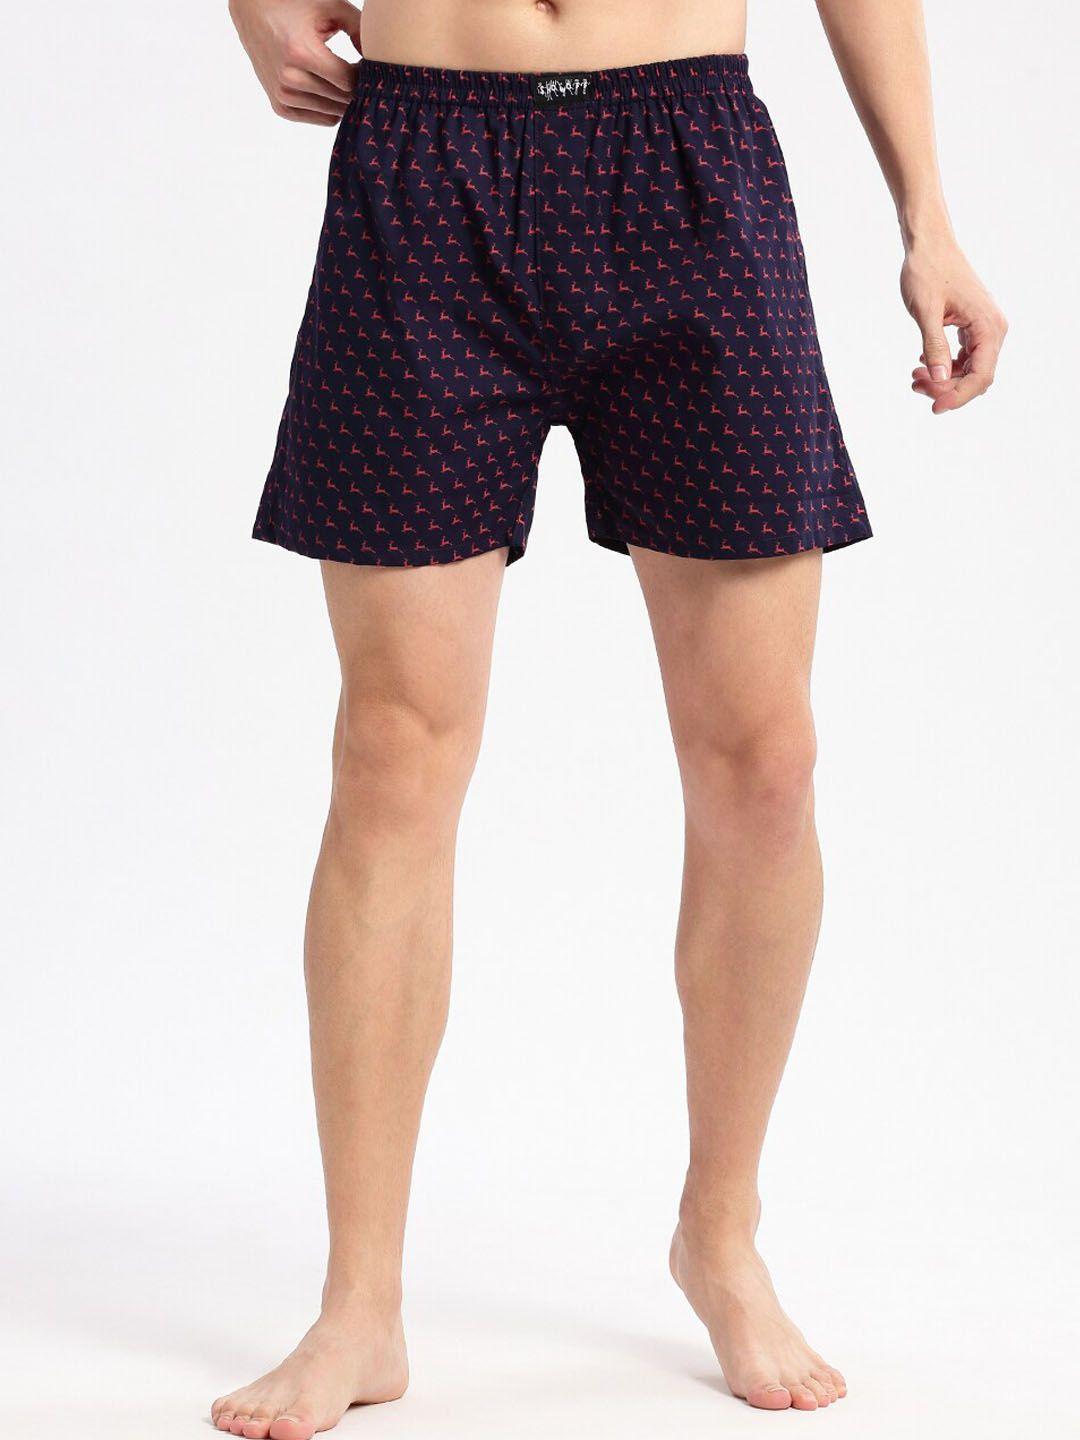 showoff deer-printed cotton boxers am-141-18